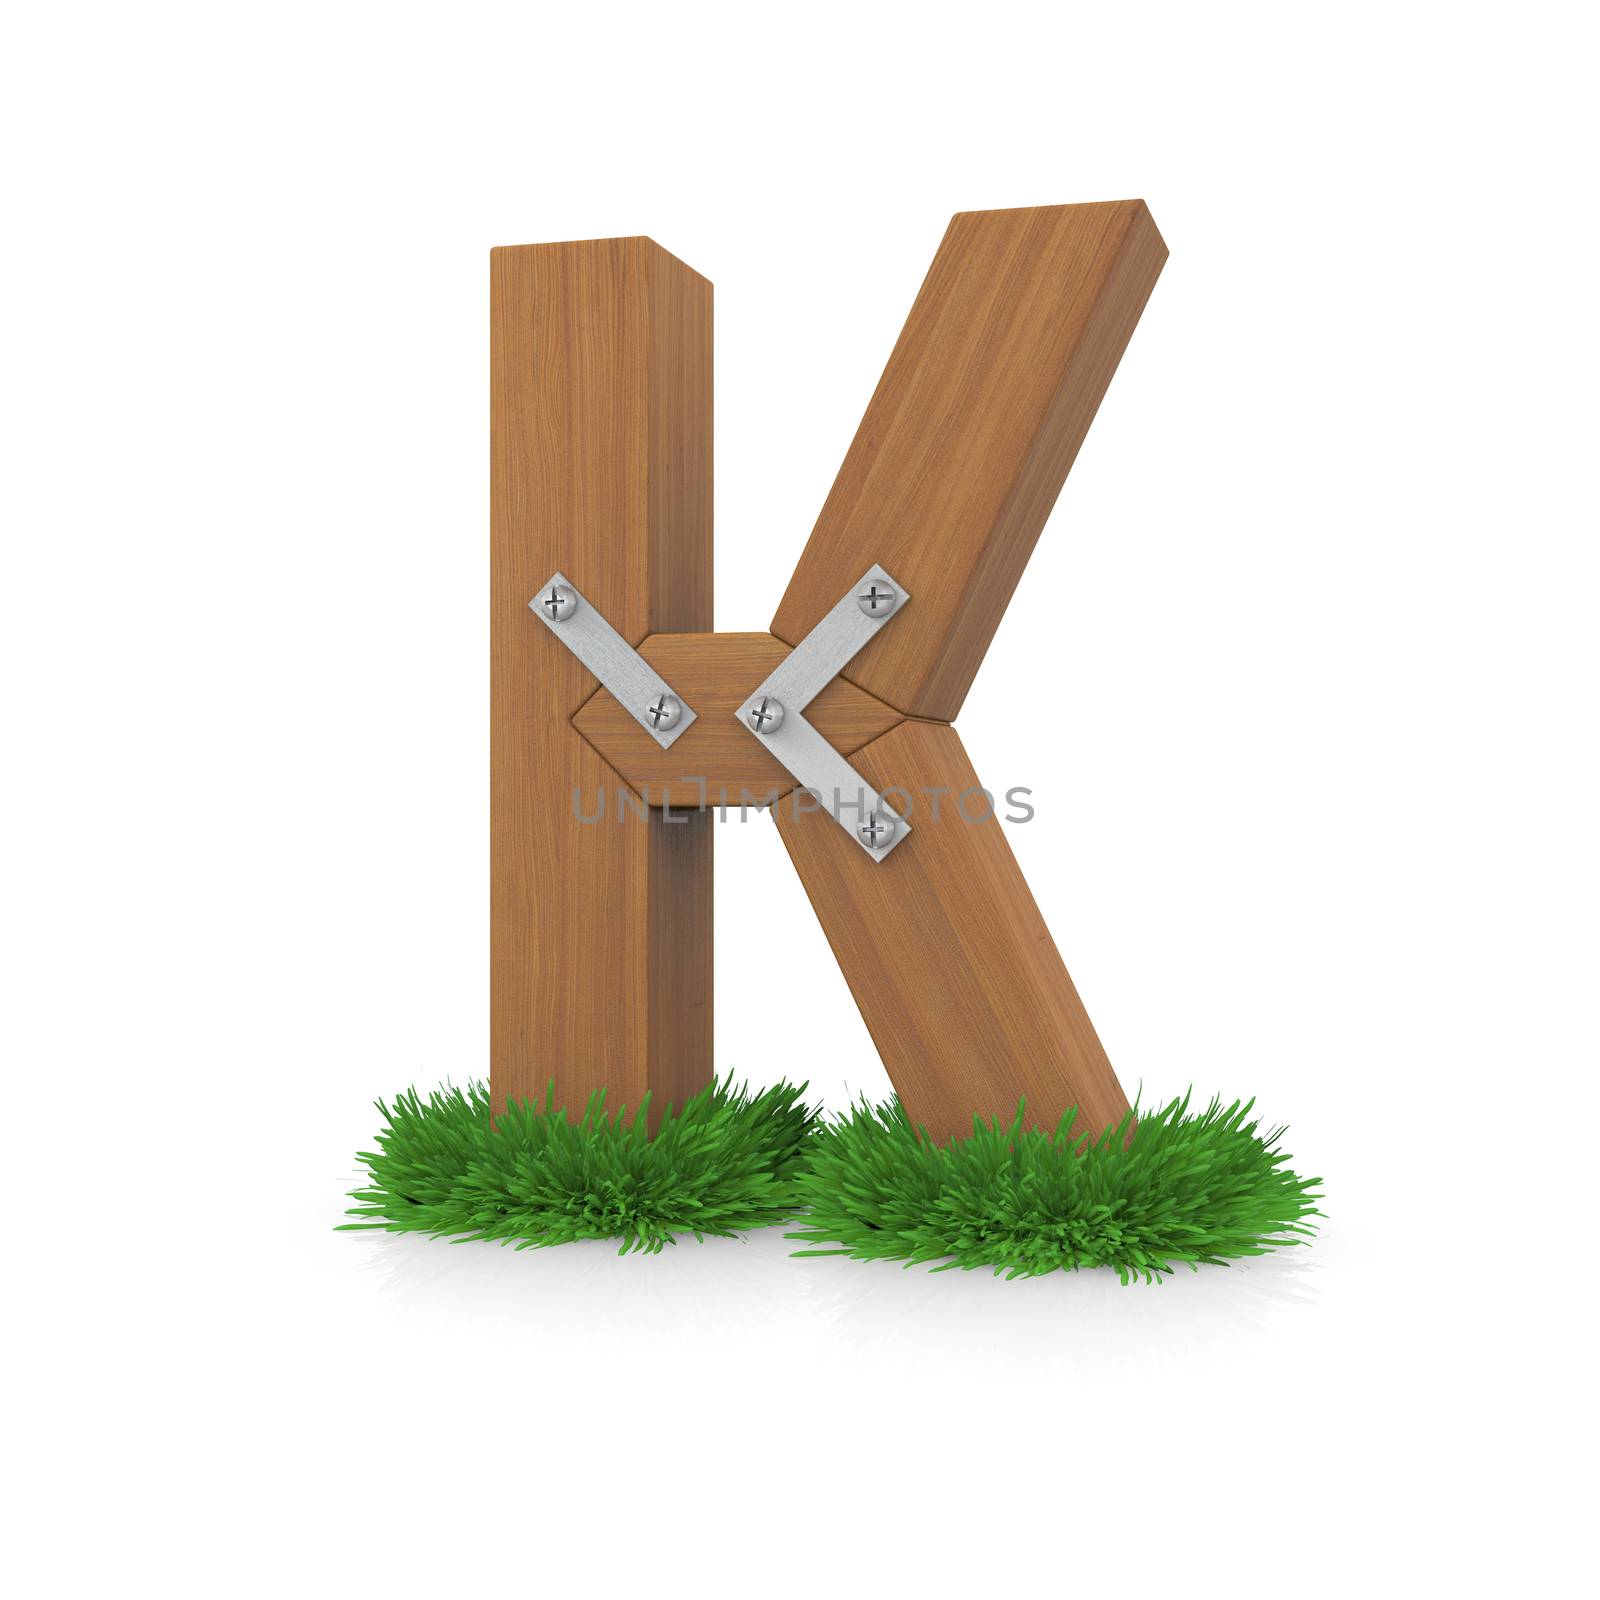 Wooden letter K in the grass by cherezoff